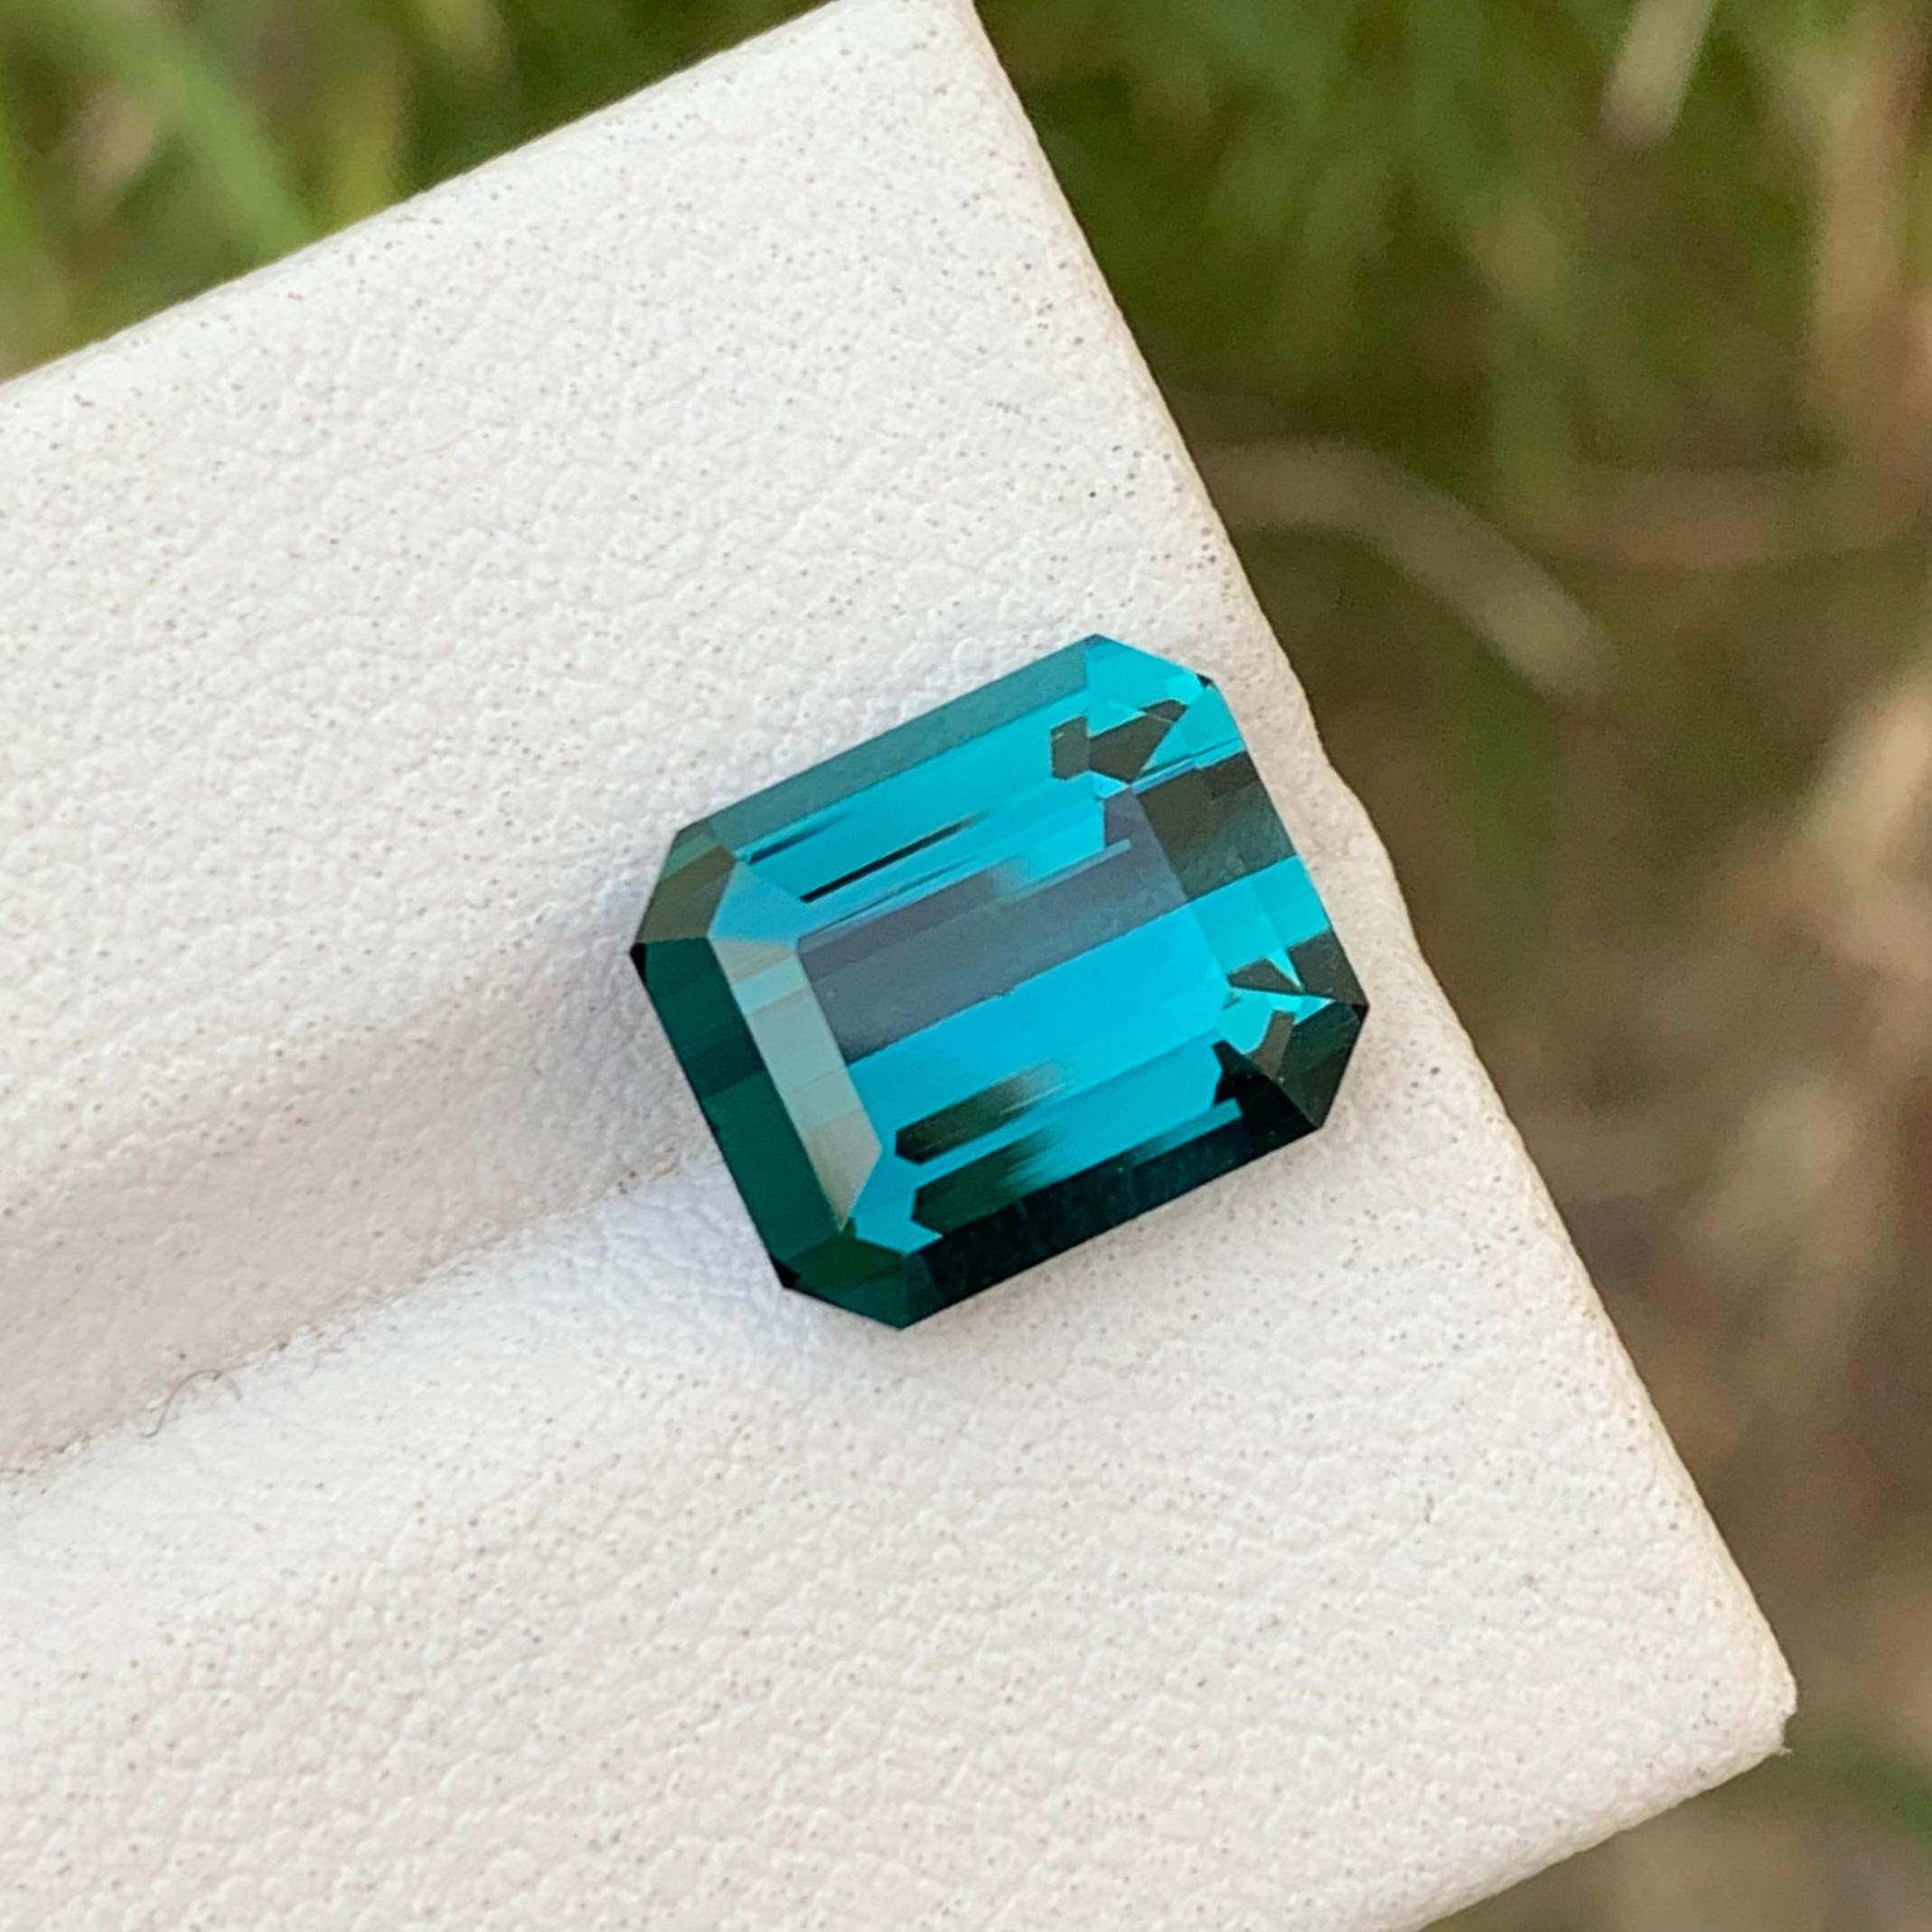 Loose Indicolite Tourmaline 
Weight: 4.50 Carats 
Dimension: 10.4x8.8x5.7 Mm
Origin: Kunar Afghanistan 
Shape: Emerald 
Treatment: Non
Color; Blue
Certificate: On Customer Demand 
Indicolite tourmaline, a member of the tourmaline family, is an